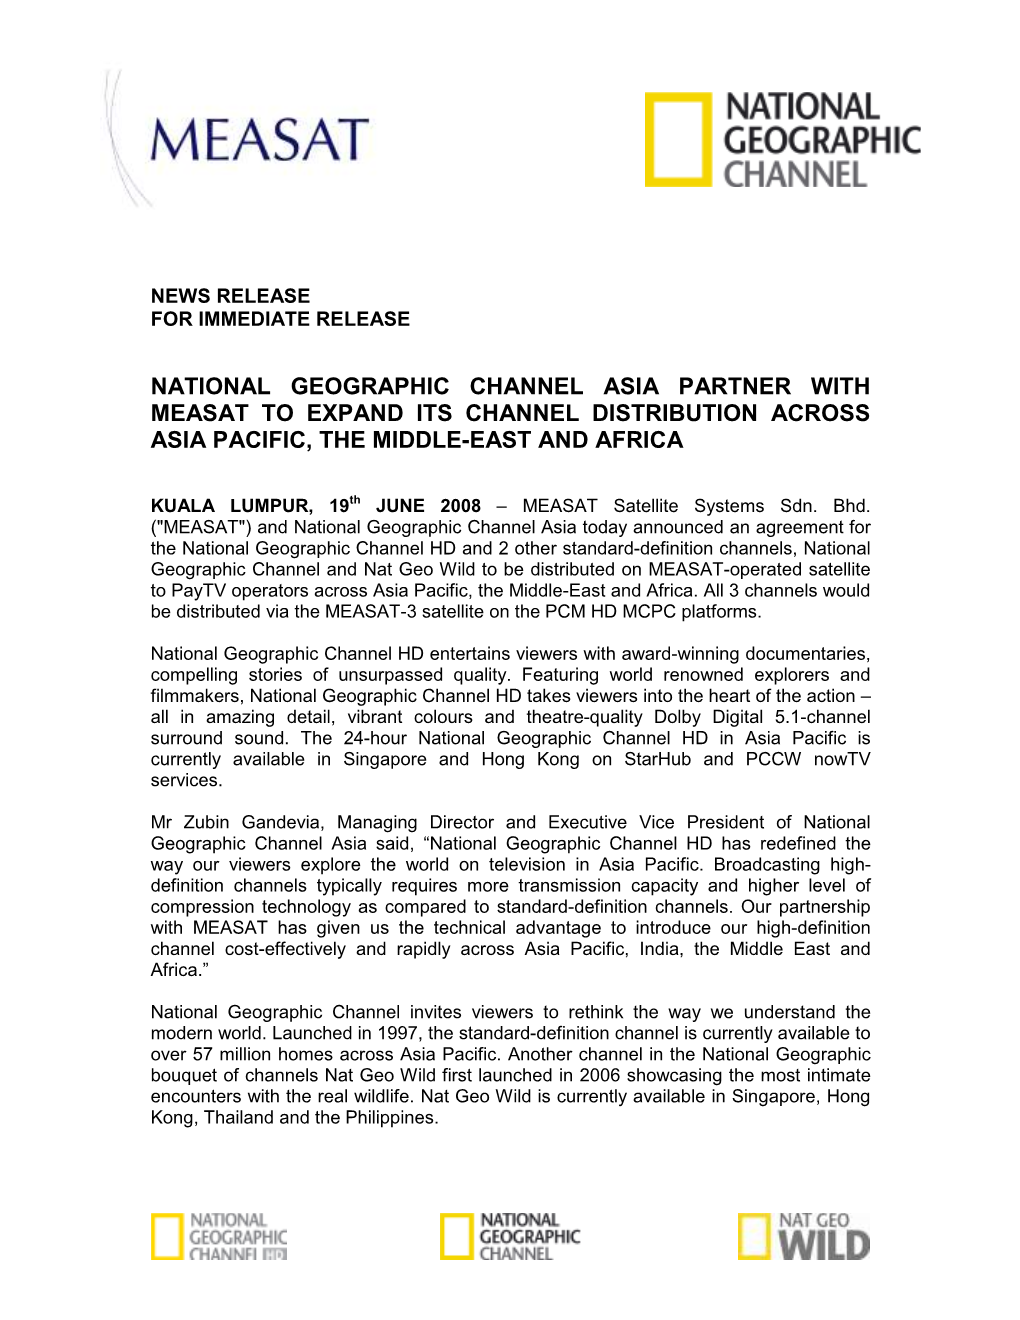 National Geographic Channel Asia Partner with Measat to Expand Its Channel Distribution Across Asia Pacific, the Middle-East and Africa